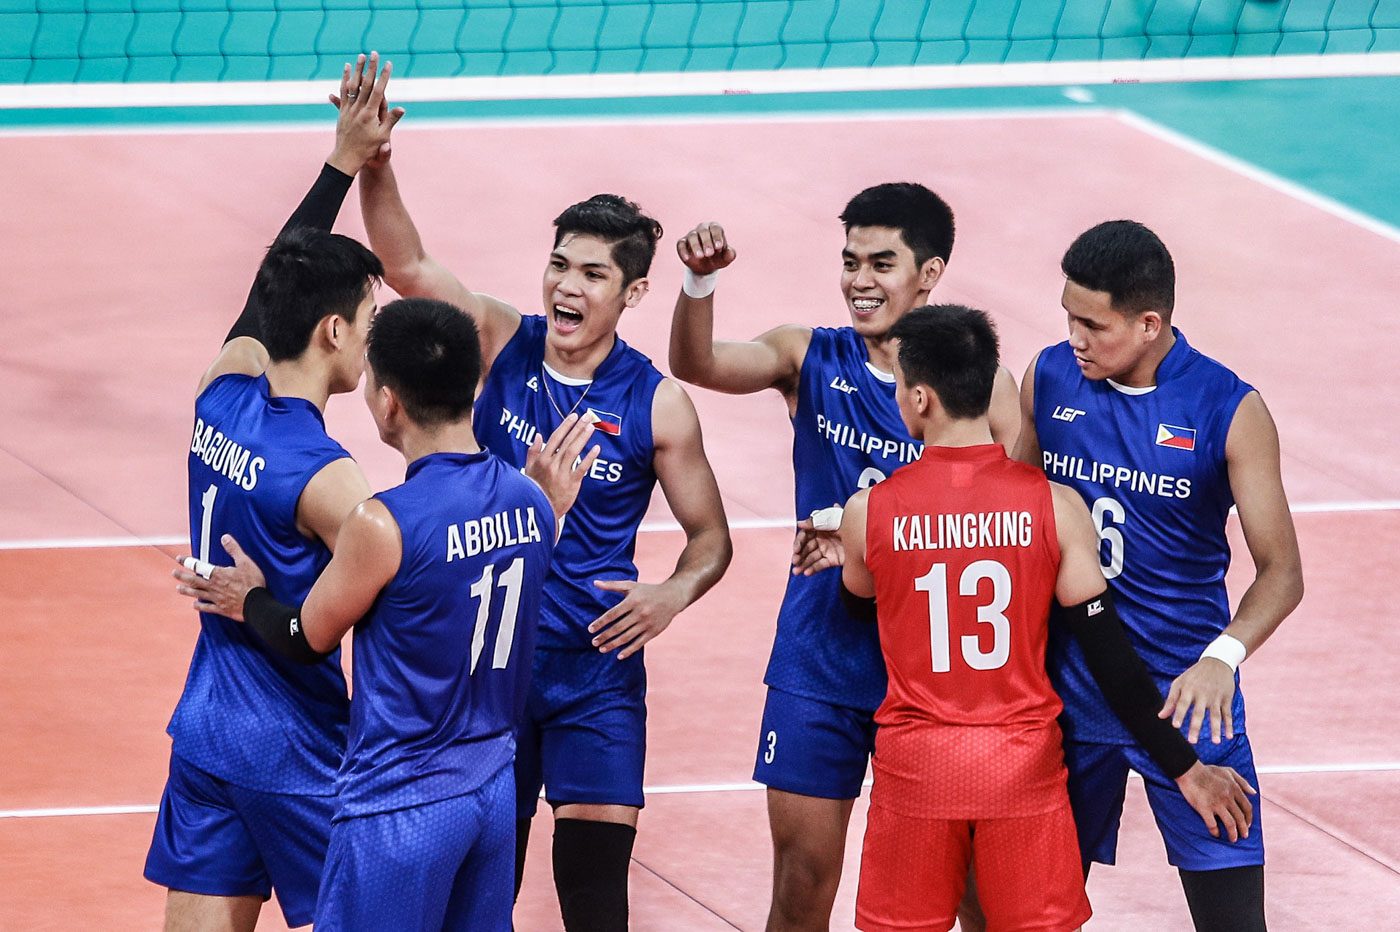 Espejo signs with Thai club Visakha after SEA Games silver finish